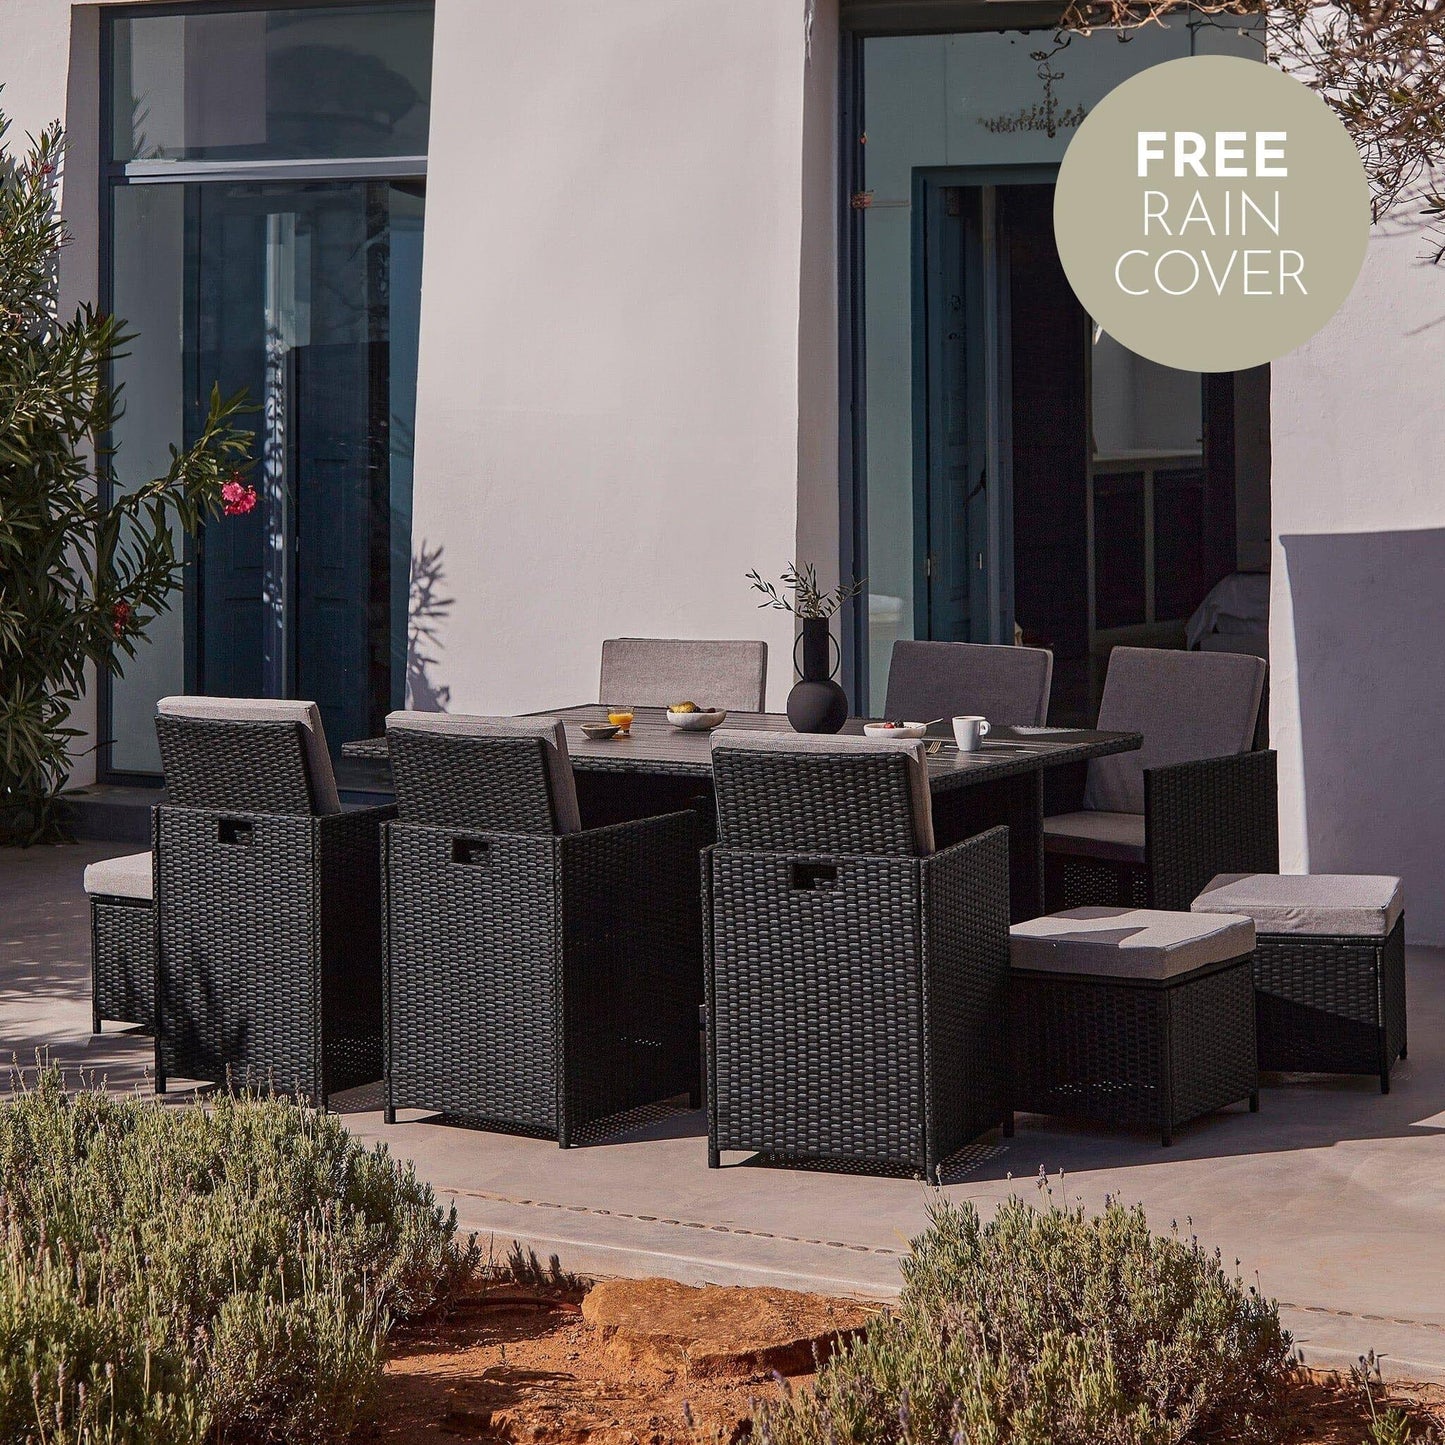 10 Seater Rattan Cube Outdoor Dining Set - Black Weave Polywood Top